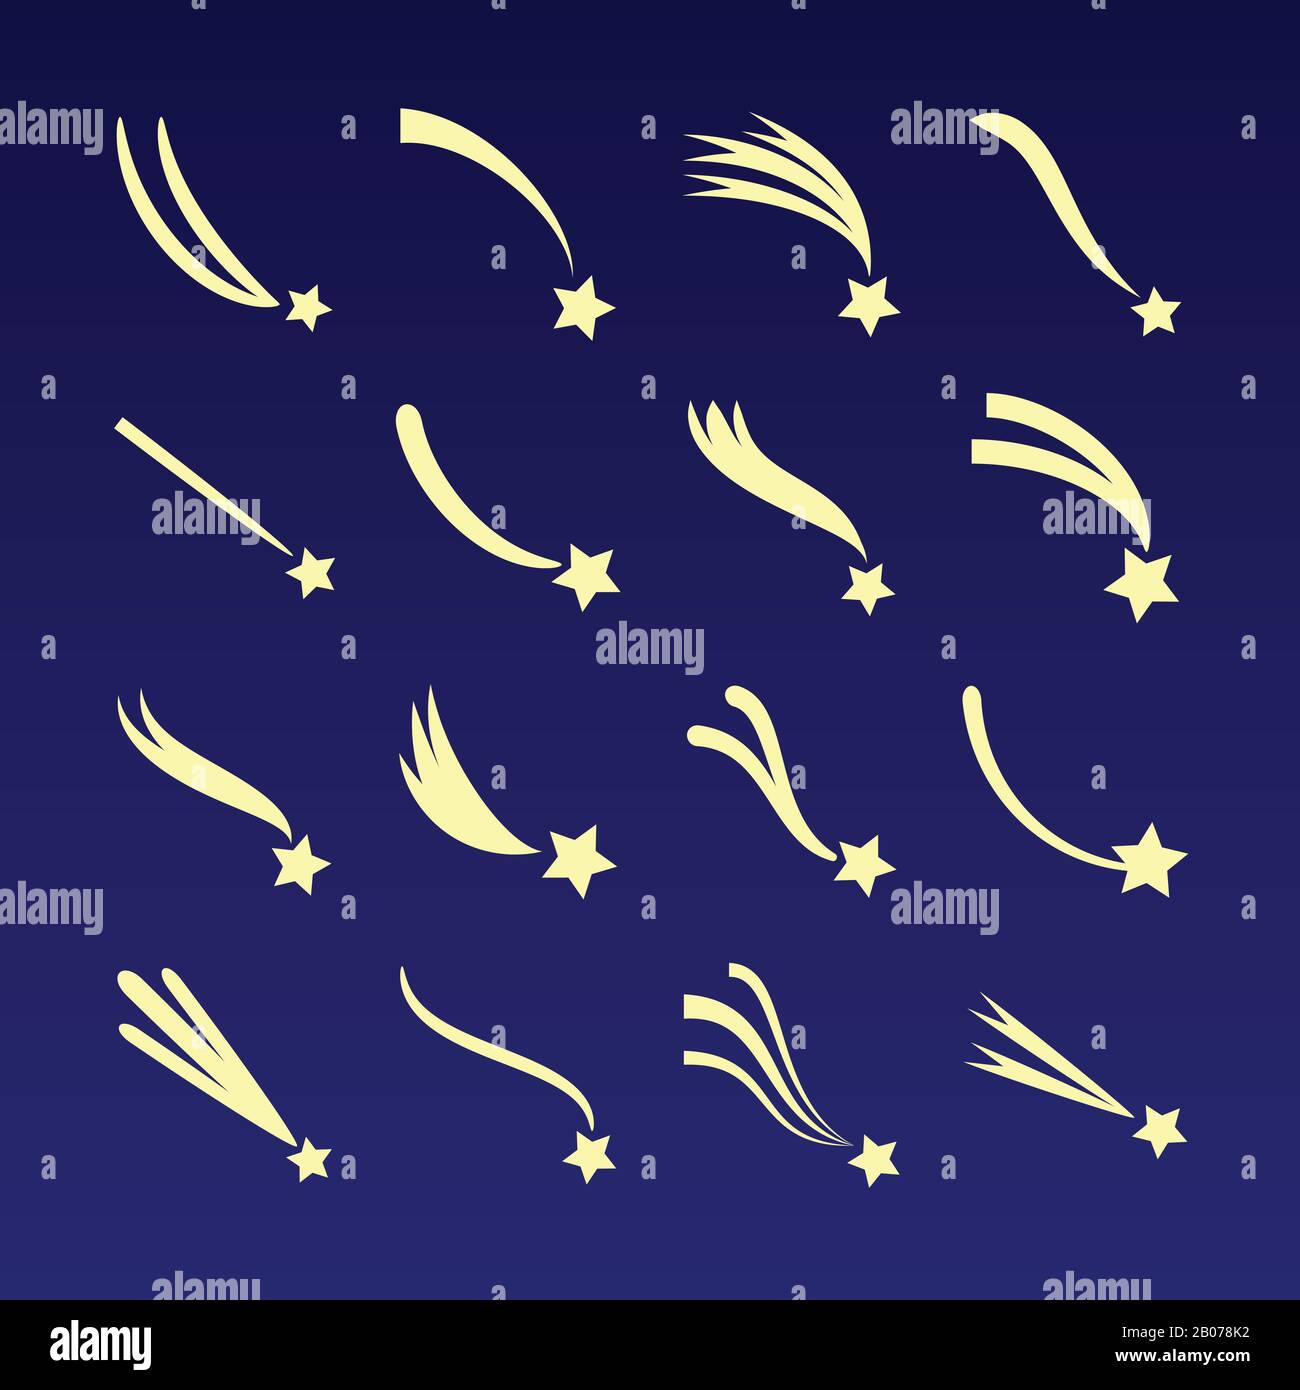 Shooting star, comet silhouettes vector icons isolated on dark blue background. Meteor falling illustration Stock Vector